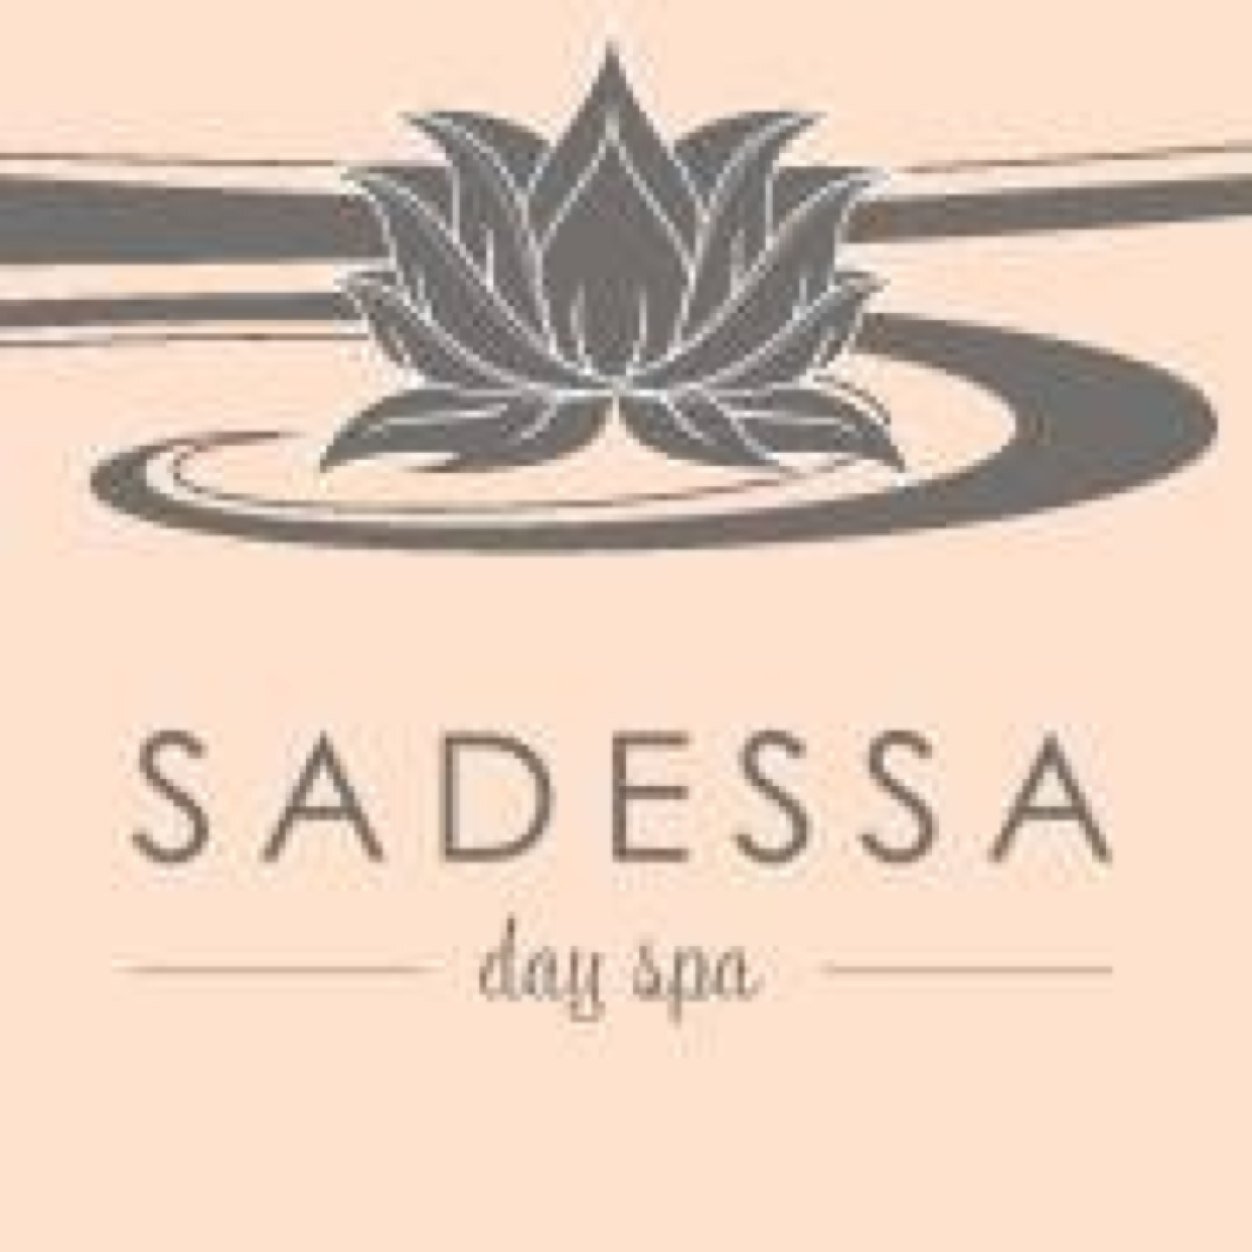 Sadessa Day Spa is a place of relaxation and pampering. We specialise in day spa treatments and all your beauty needs. Call 0747240282 for an appointment today.